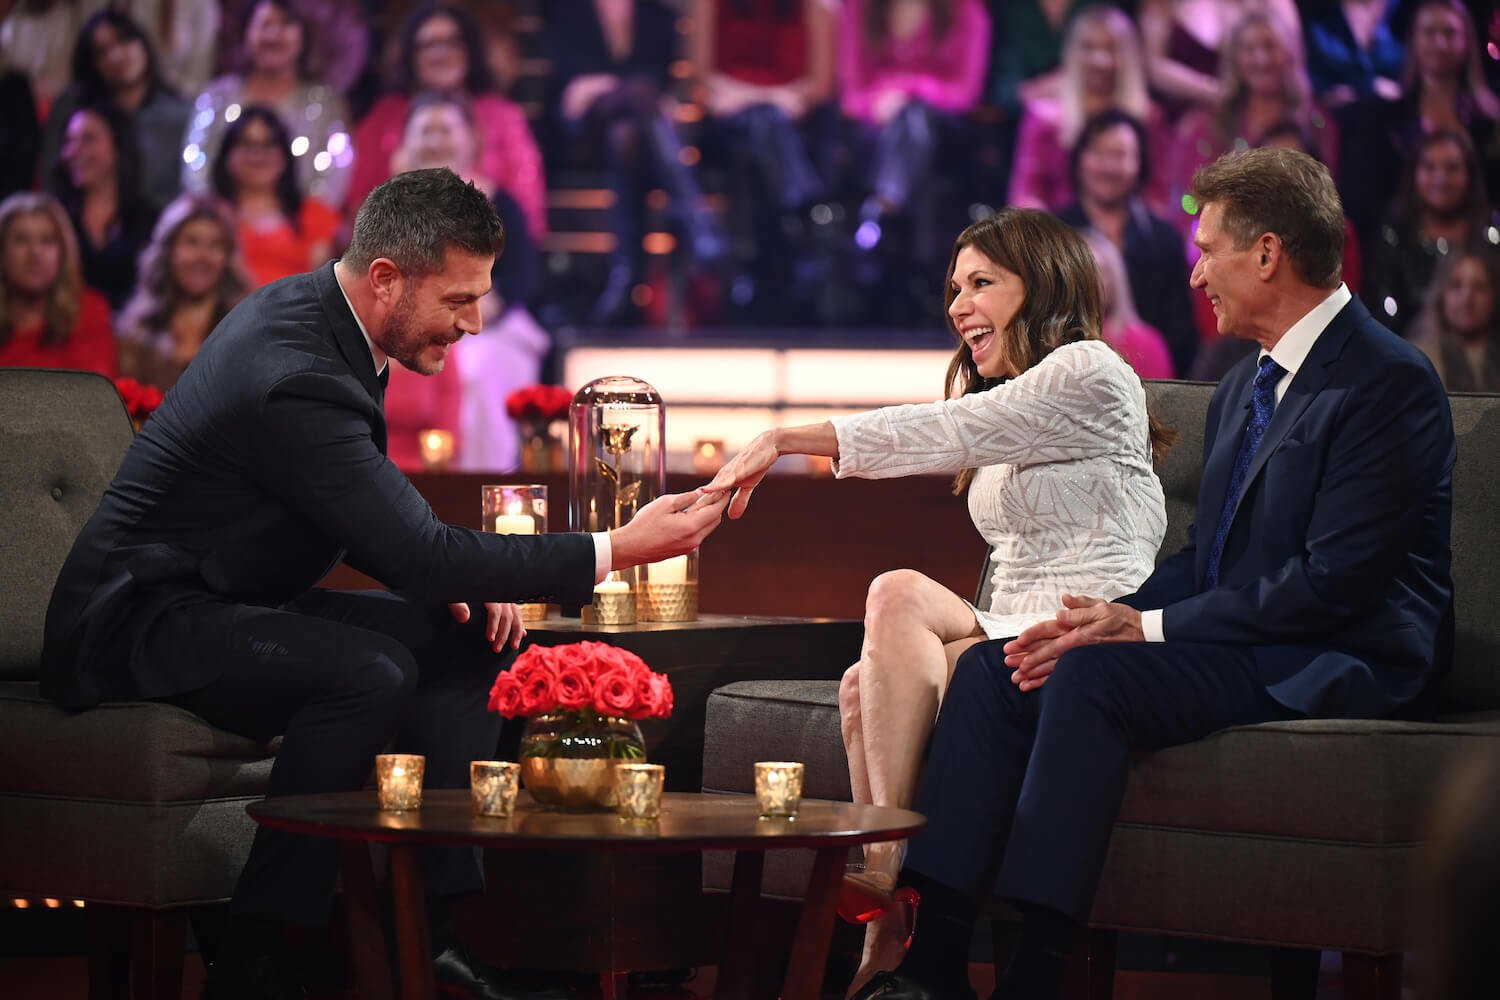 'The Golden Bachelor' winner Theresa Nist showing her engagement ring to Jesse Palmer while sitting next to Gerry Turner during the After the Final Rose